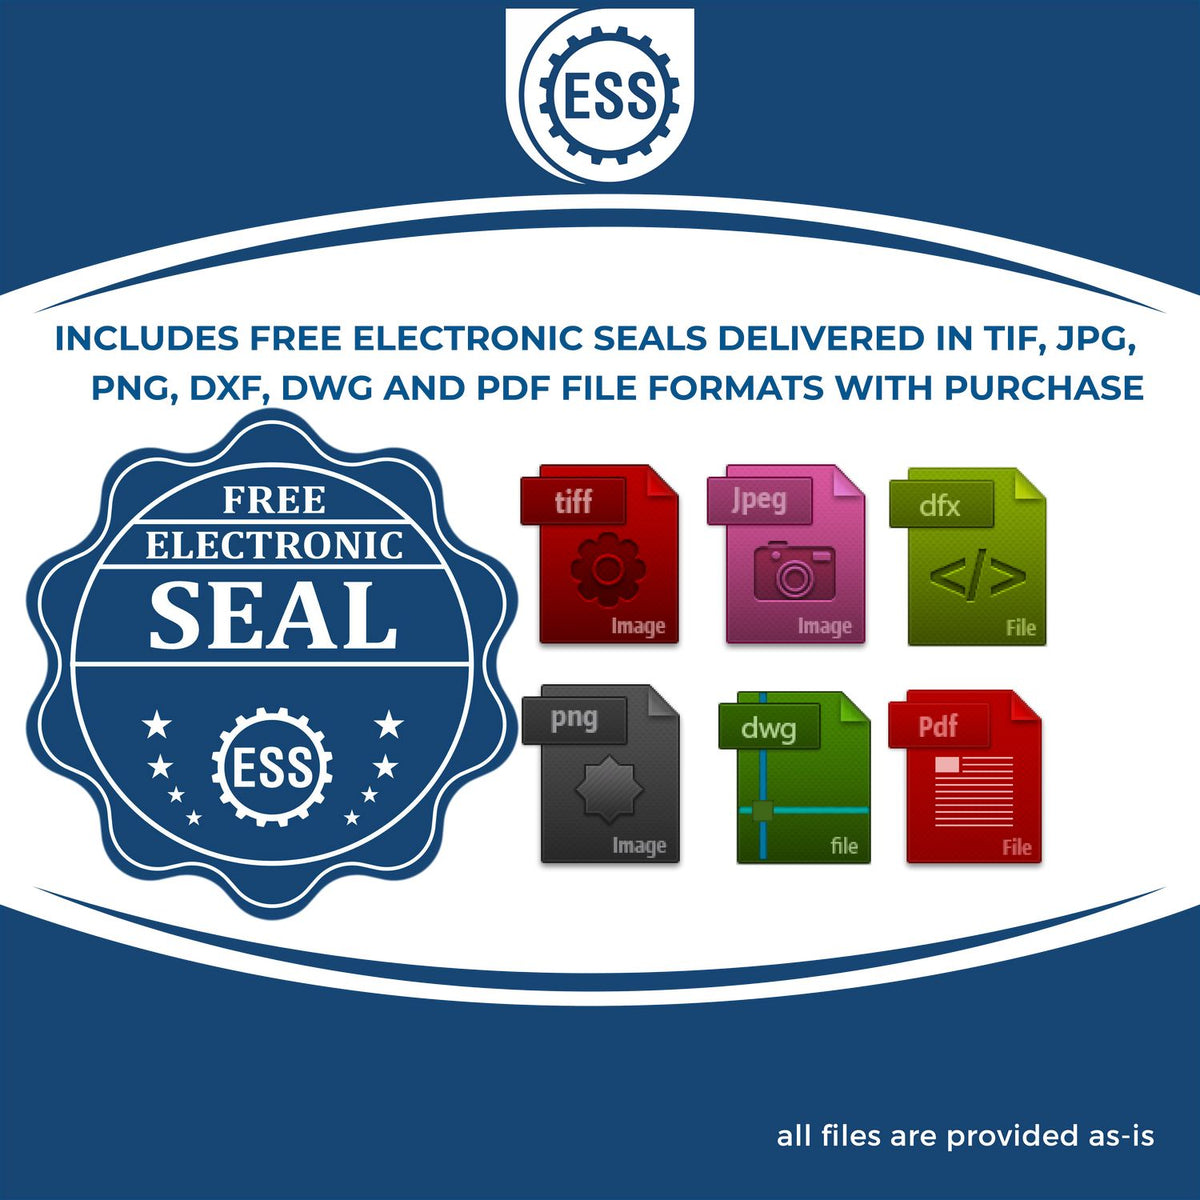 An infographic for the free electronic seal for the Self-Inking North Carolina PE Stamp illustrating the different file type icons such as DXF, DWG, TIF, JPG and PNG.